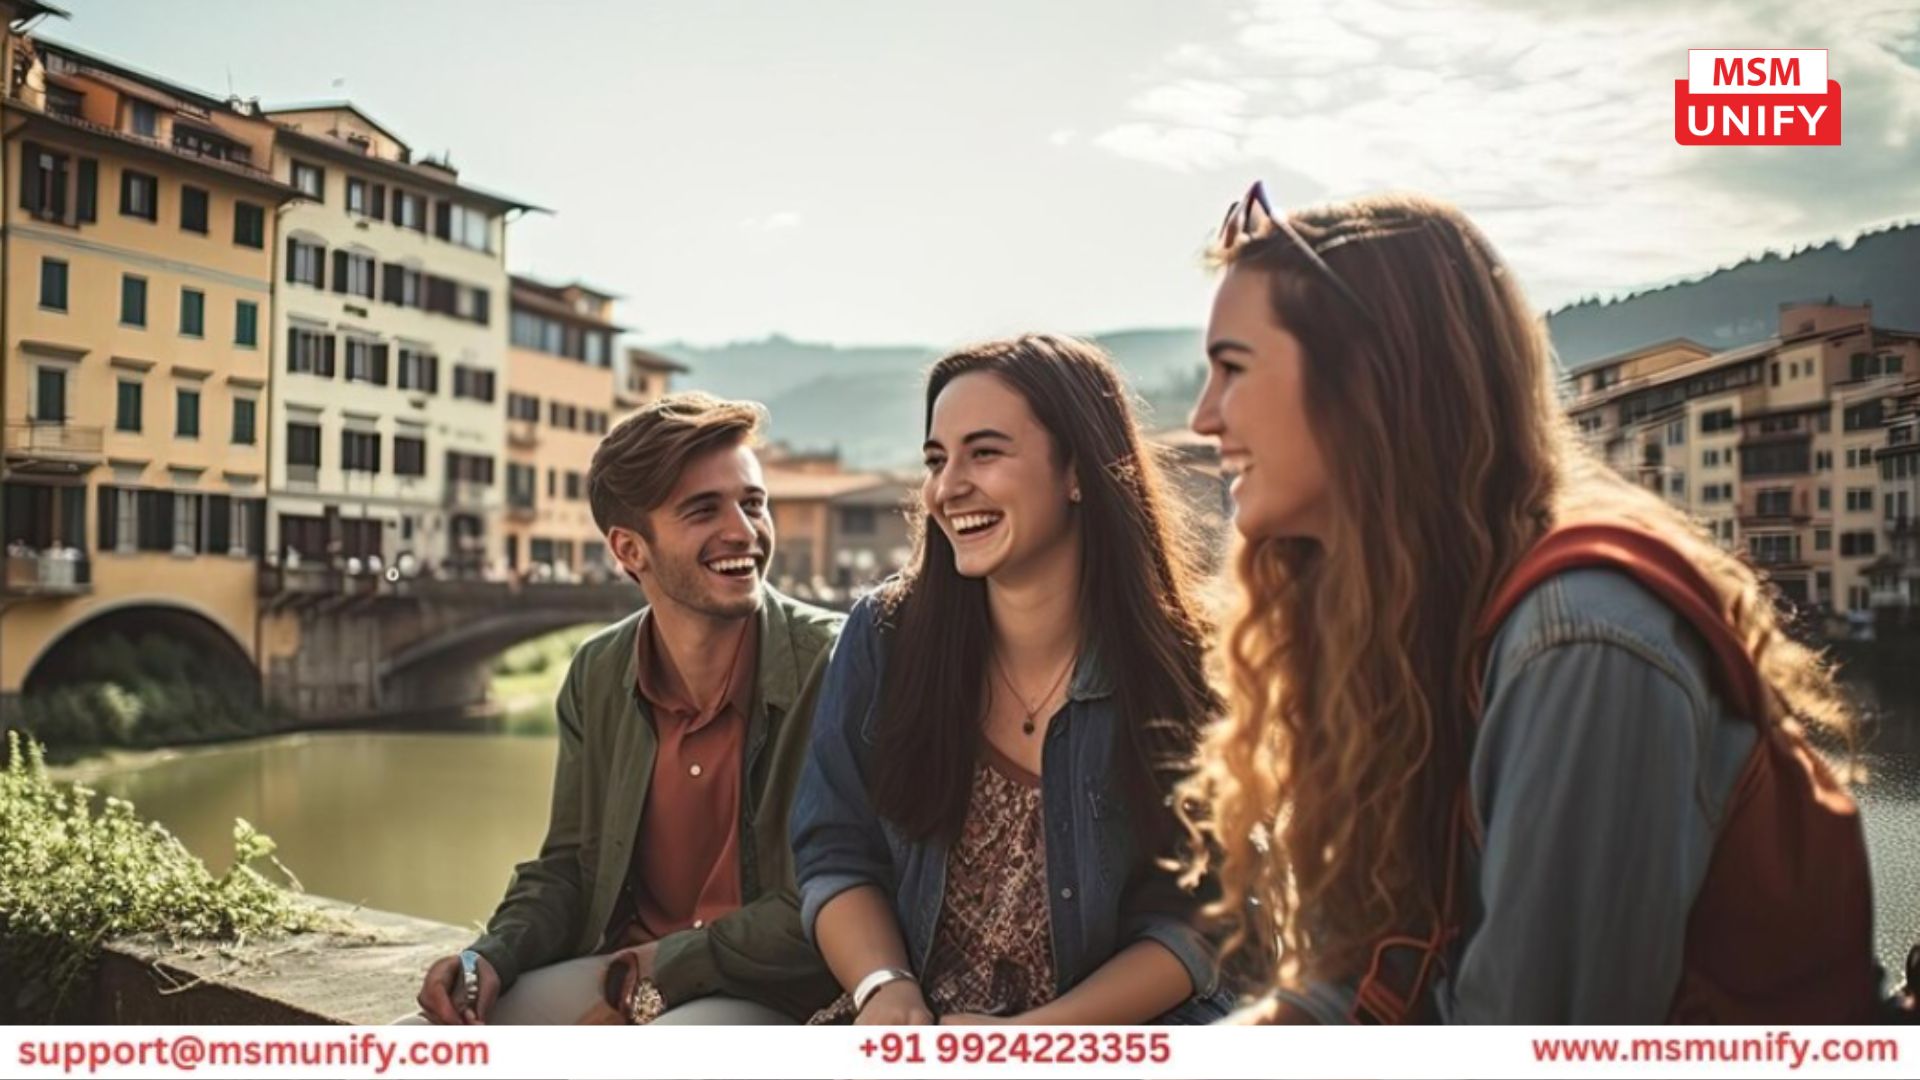 Explore the extraordinary advantages of <a href="https://www.msmunify.com/blogs/the-benefits-of-living-with-your-friends/">living with friends</a> while studying abroad! From cultivating lasting bonds to enhancing cultural immersion, discover the joy and growth that comes with communal living. Click to embark on a life-changing adventure.
